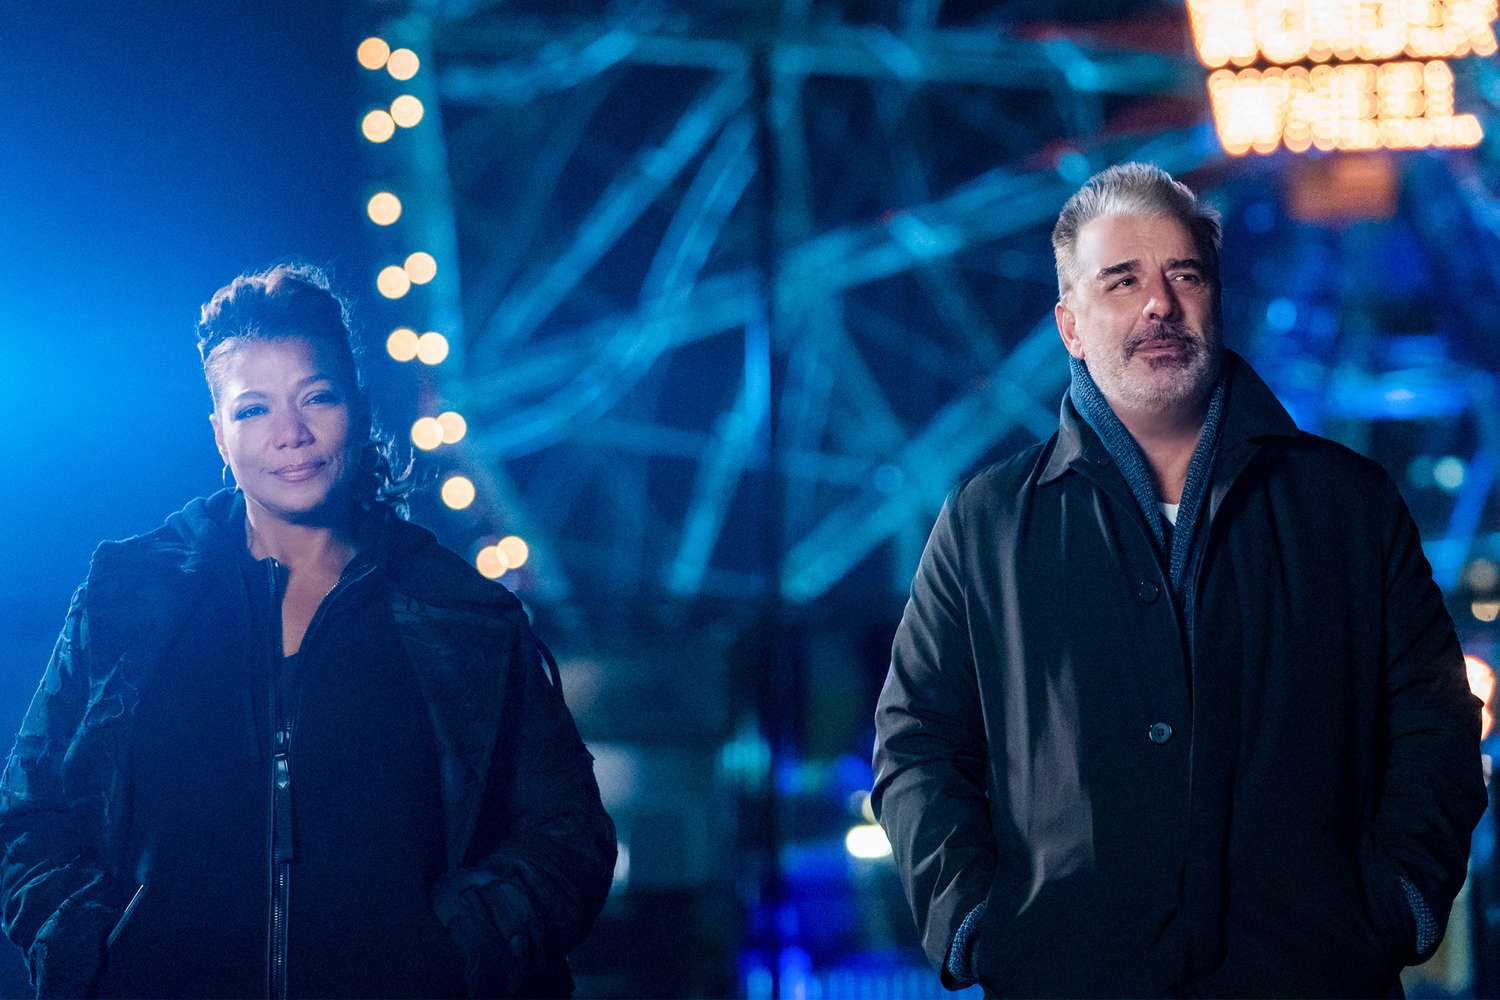 Queen Latifah addresses Chris Noth's firing from 'The Equalizer': 'Justice has to prevail'